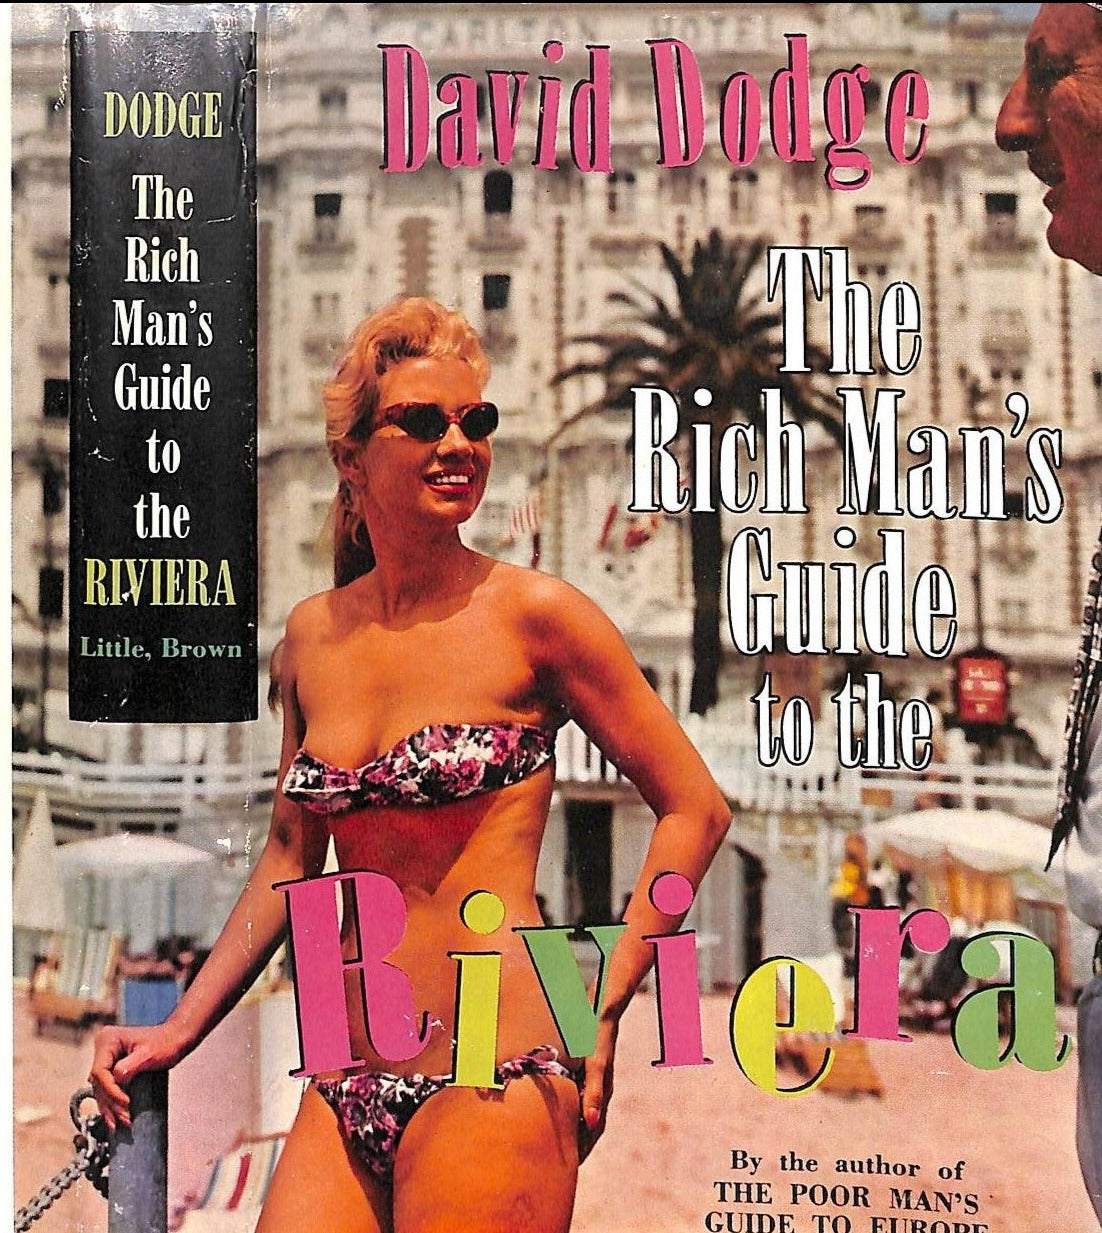 "The Rich Man's Guide To The Riviera" 1962 DODGE, David